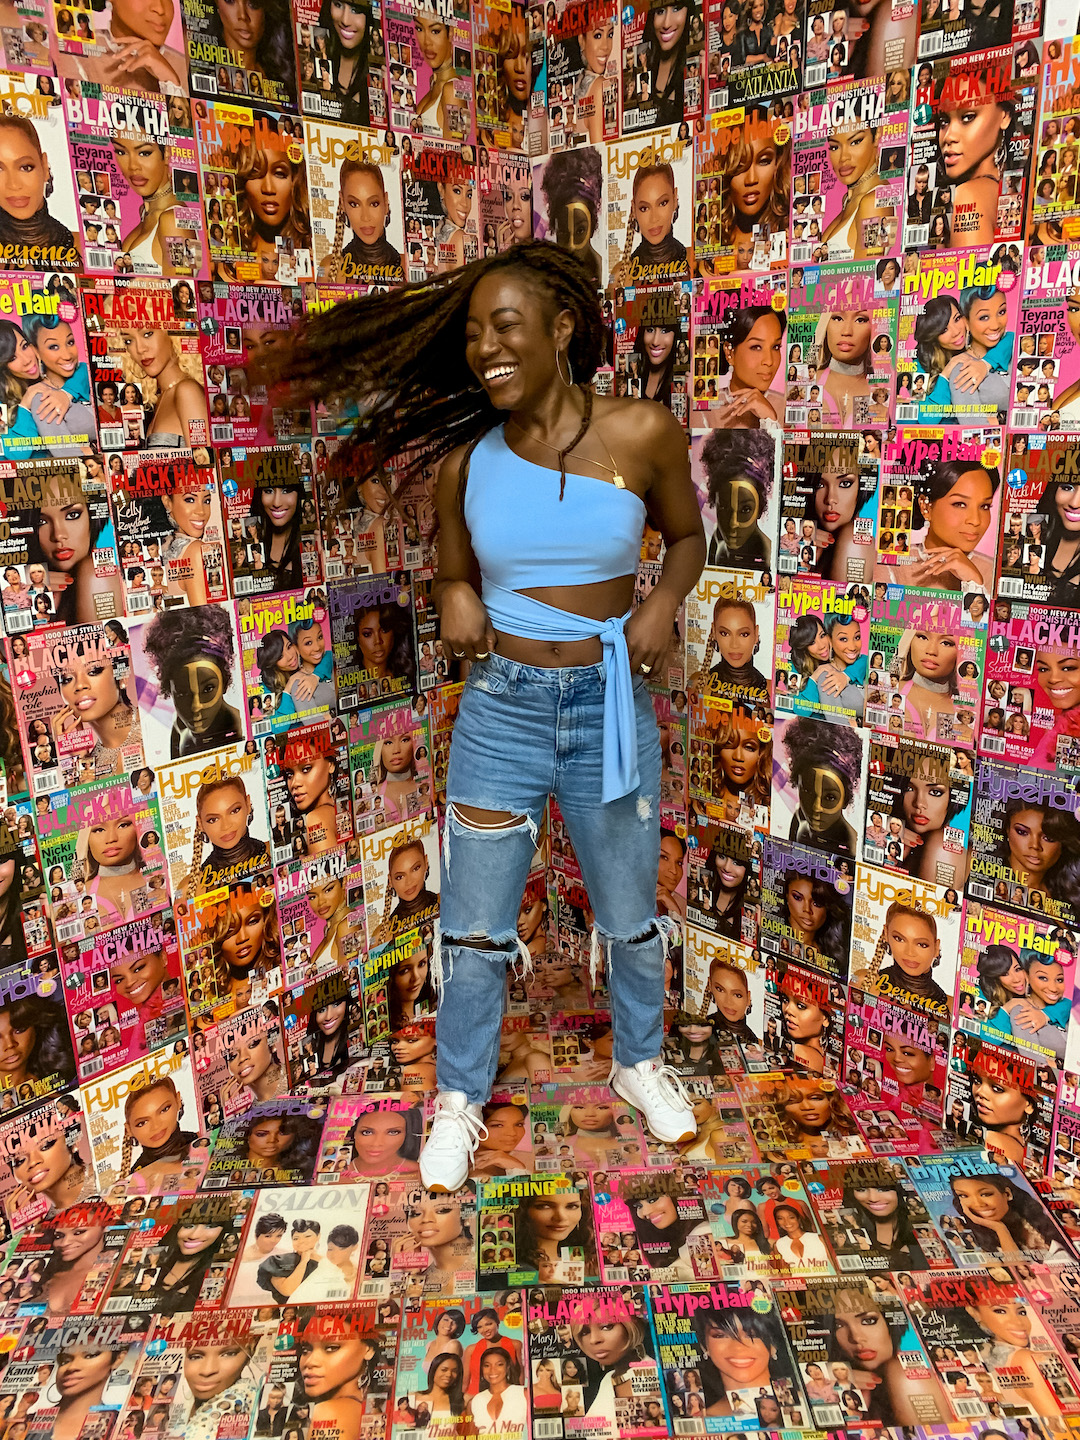 woman whipping her hair with magazine covers in the background 